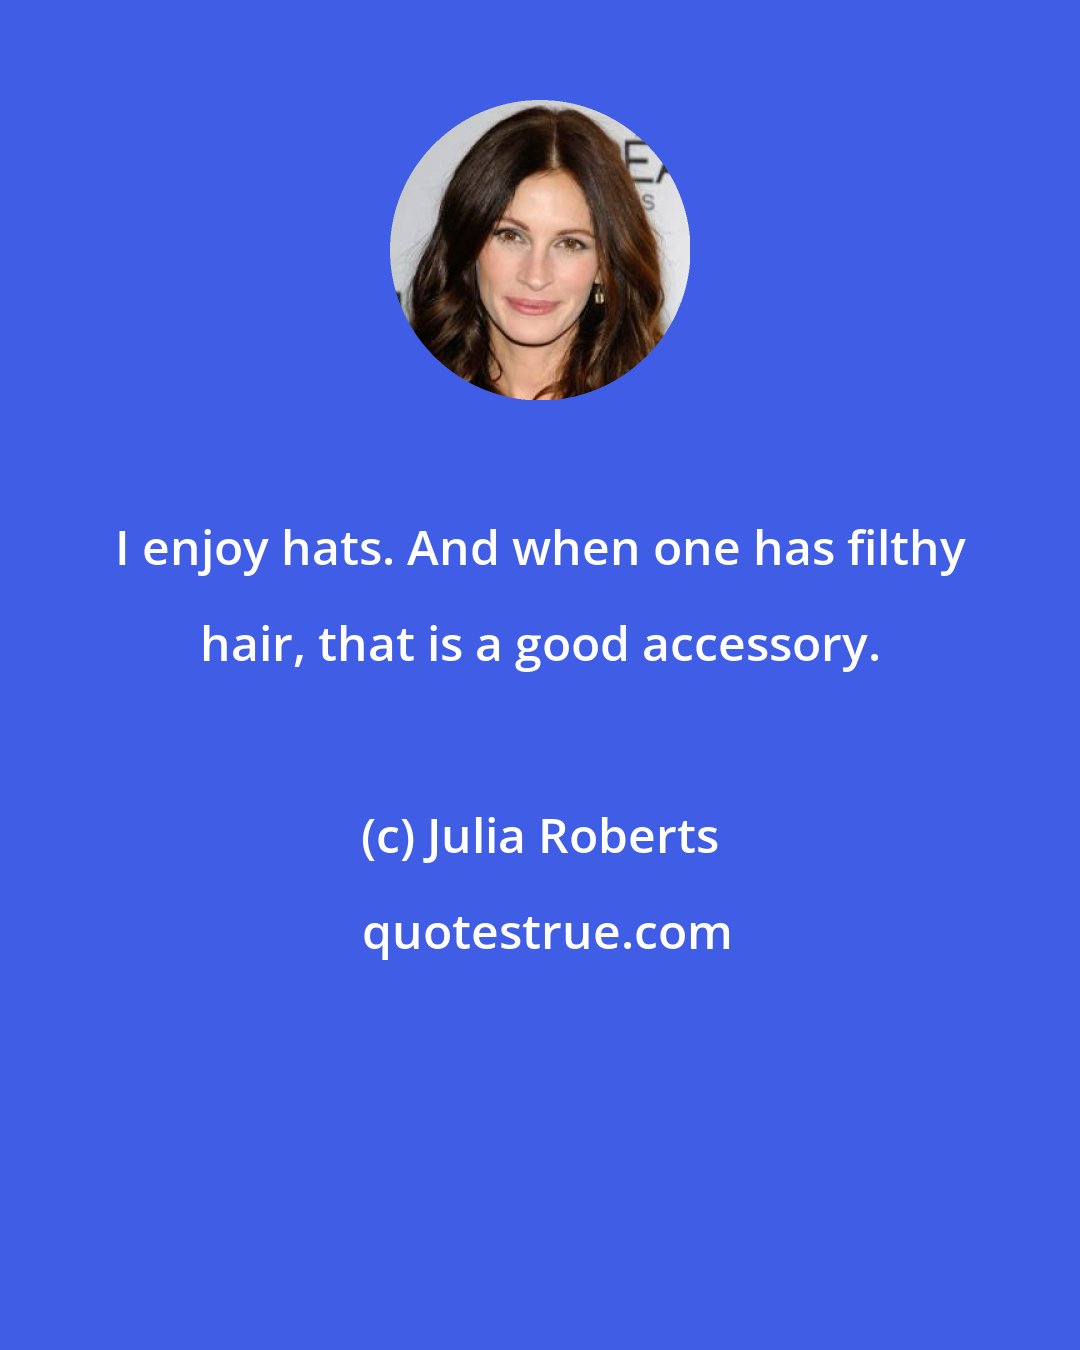 Julia Roberts: I enjoy hats. And when one has filthy hair, that is a good accessory.